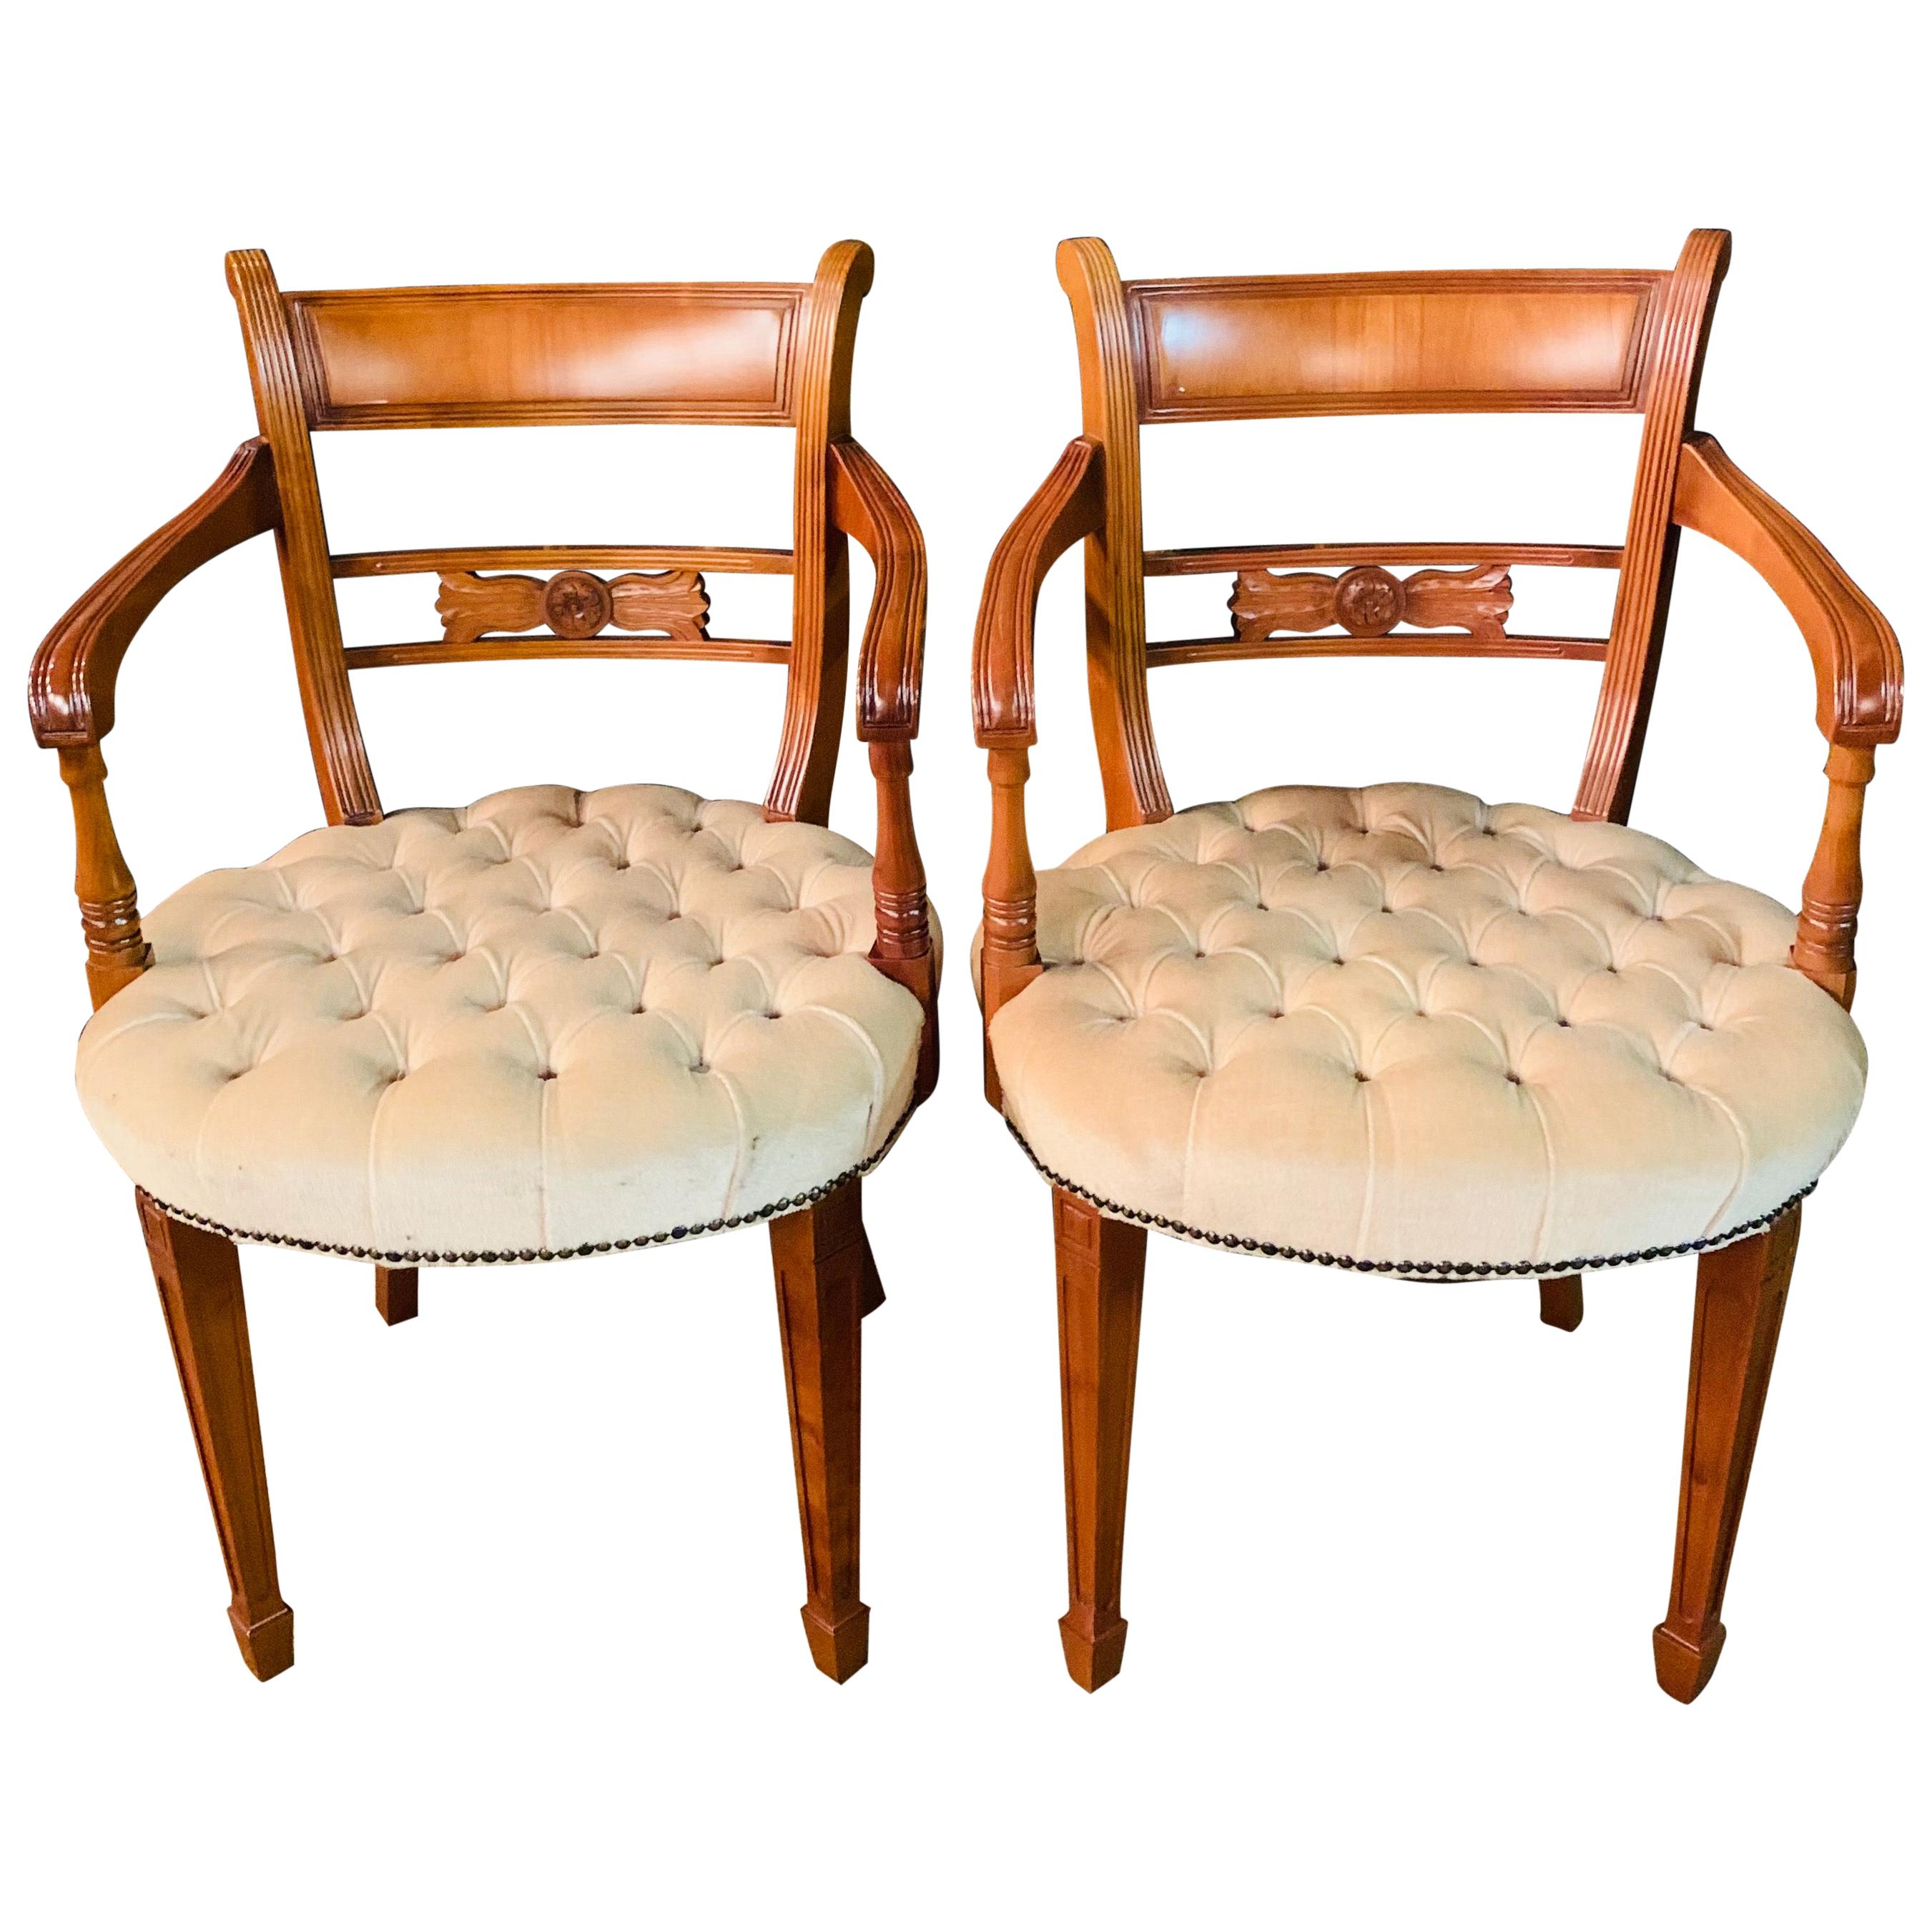 Original Exclusive Chesterfield Armchairs